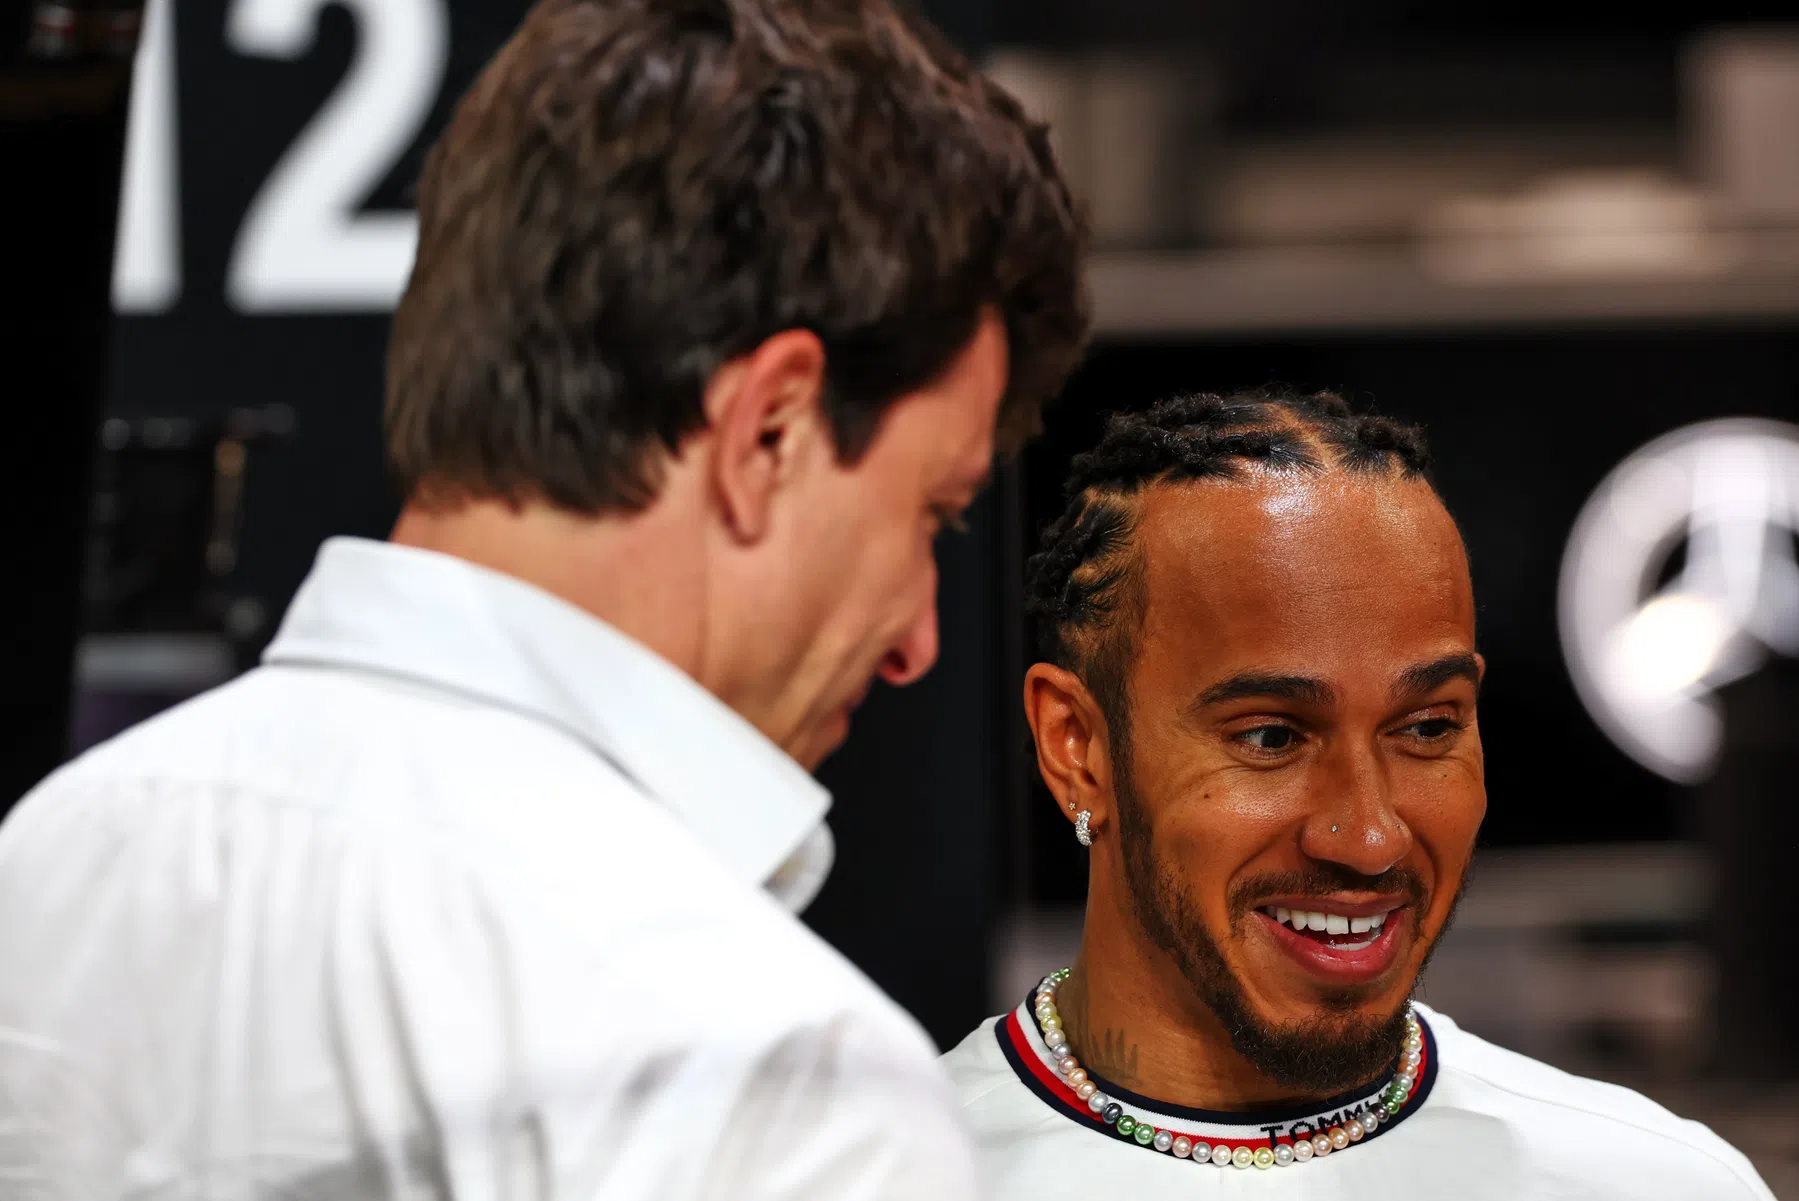 Tensions between Hamilton and Russell at Mercedes? Wolff responds